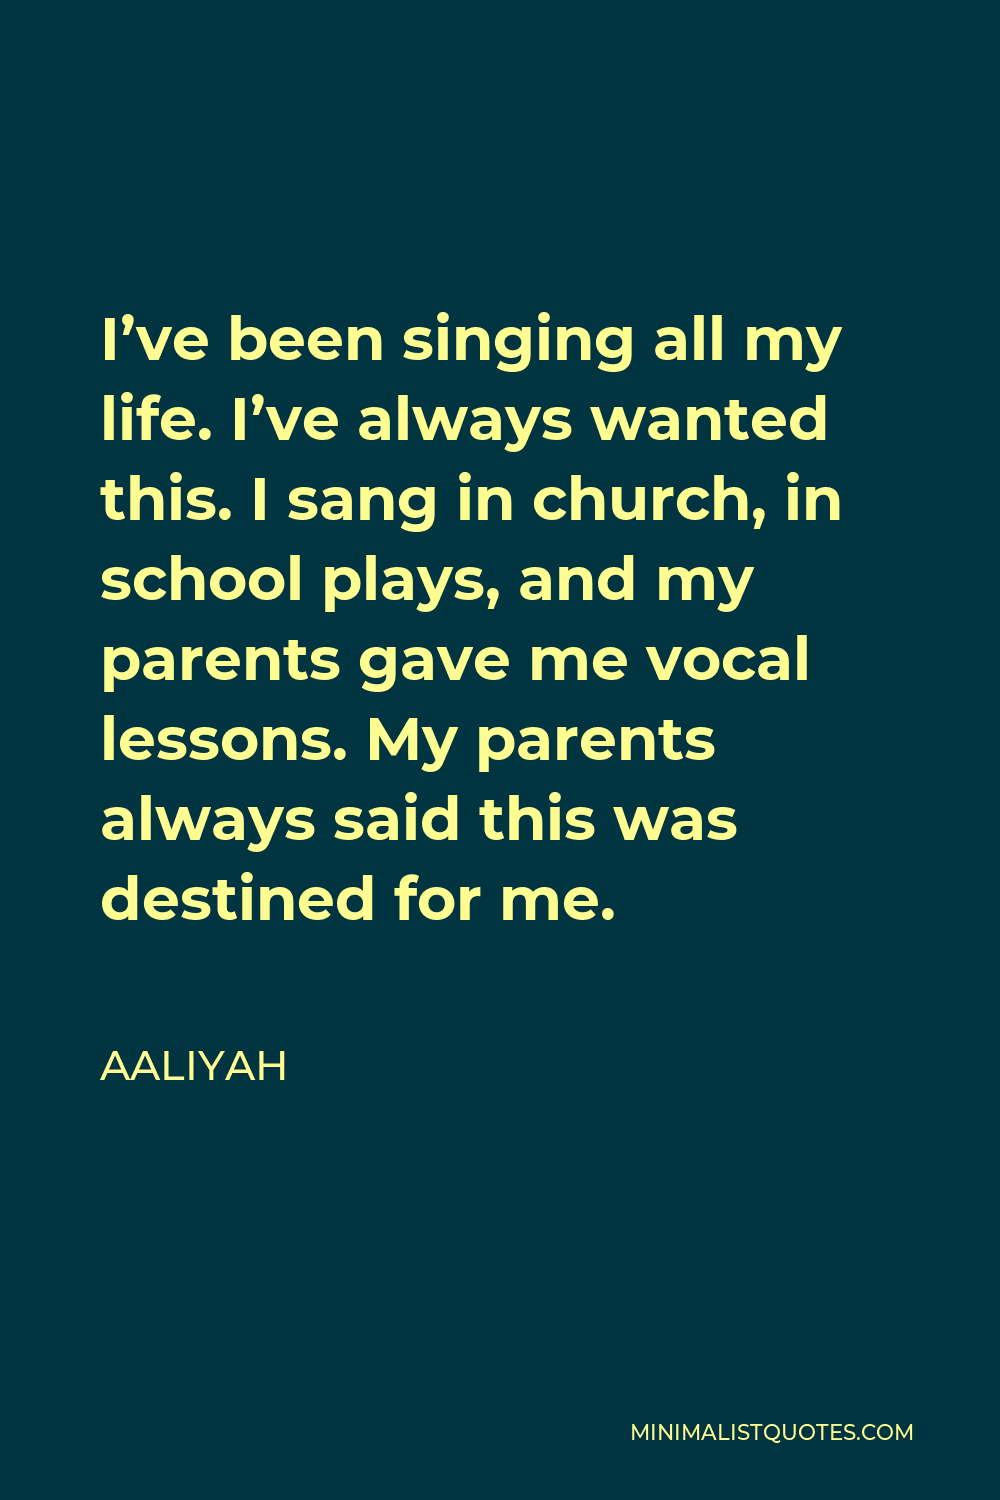 Aaliyah Quote - I’ve been singing all my life. I’ve always wanted this. I sang in church, in school plays, and my parents gave me vocal lessons. My parents always said this was destined for me.